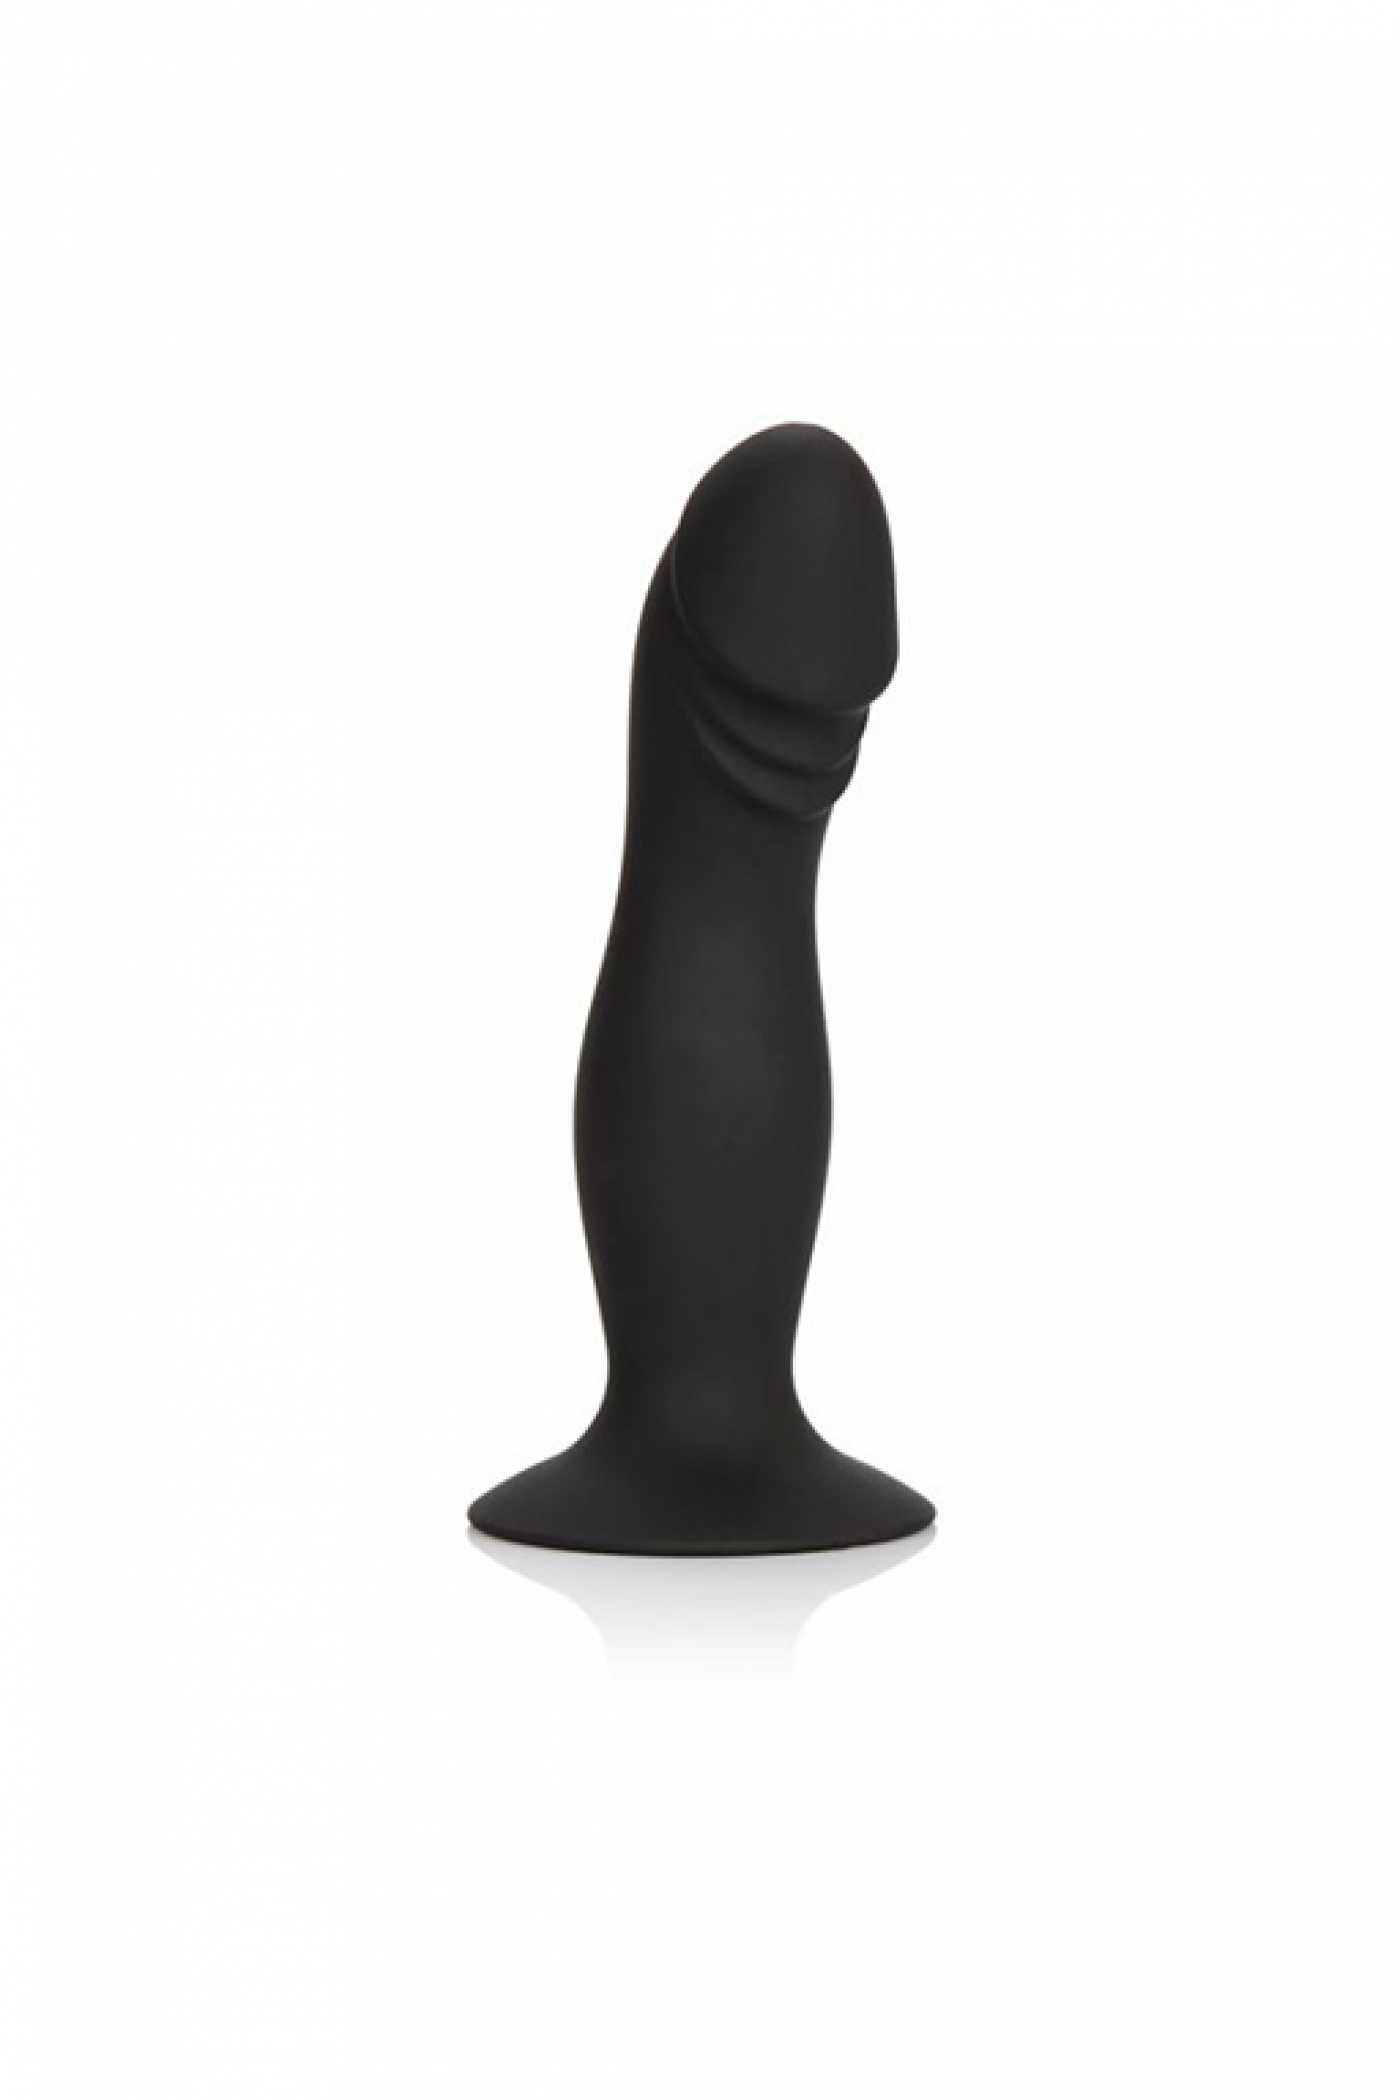 Silicone Anal Stud™ - Black